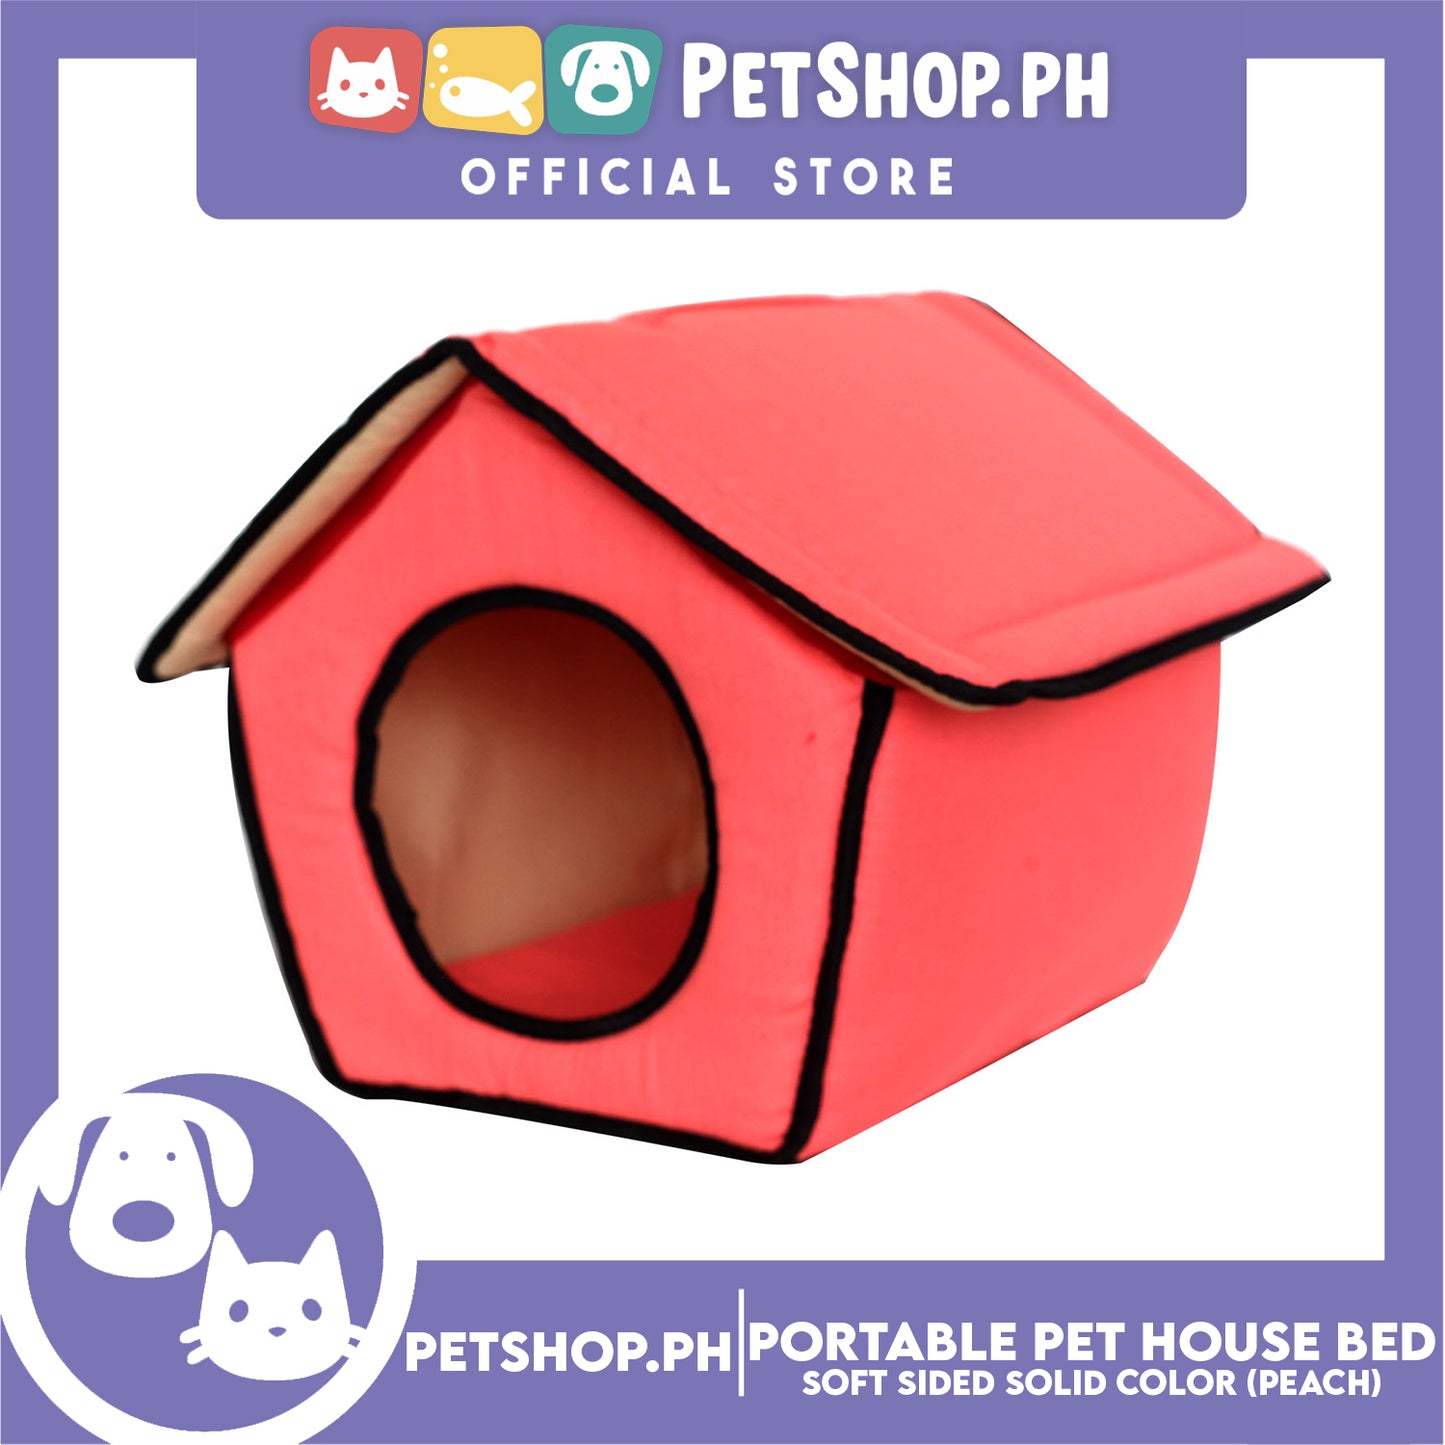 Portable Pet House Bed With Soft Sided Solid Color 25x31x32cm Small (Peach)